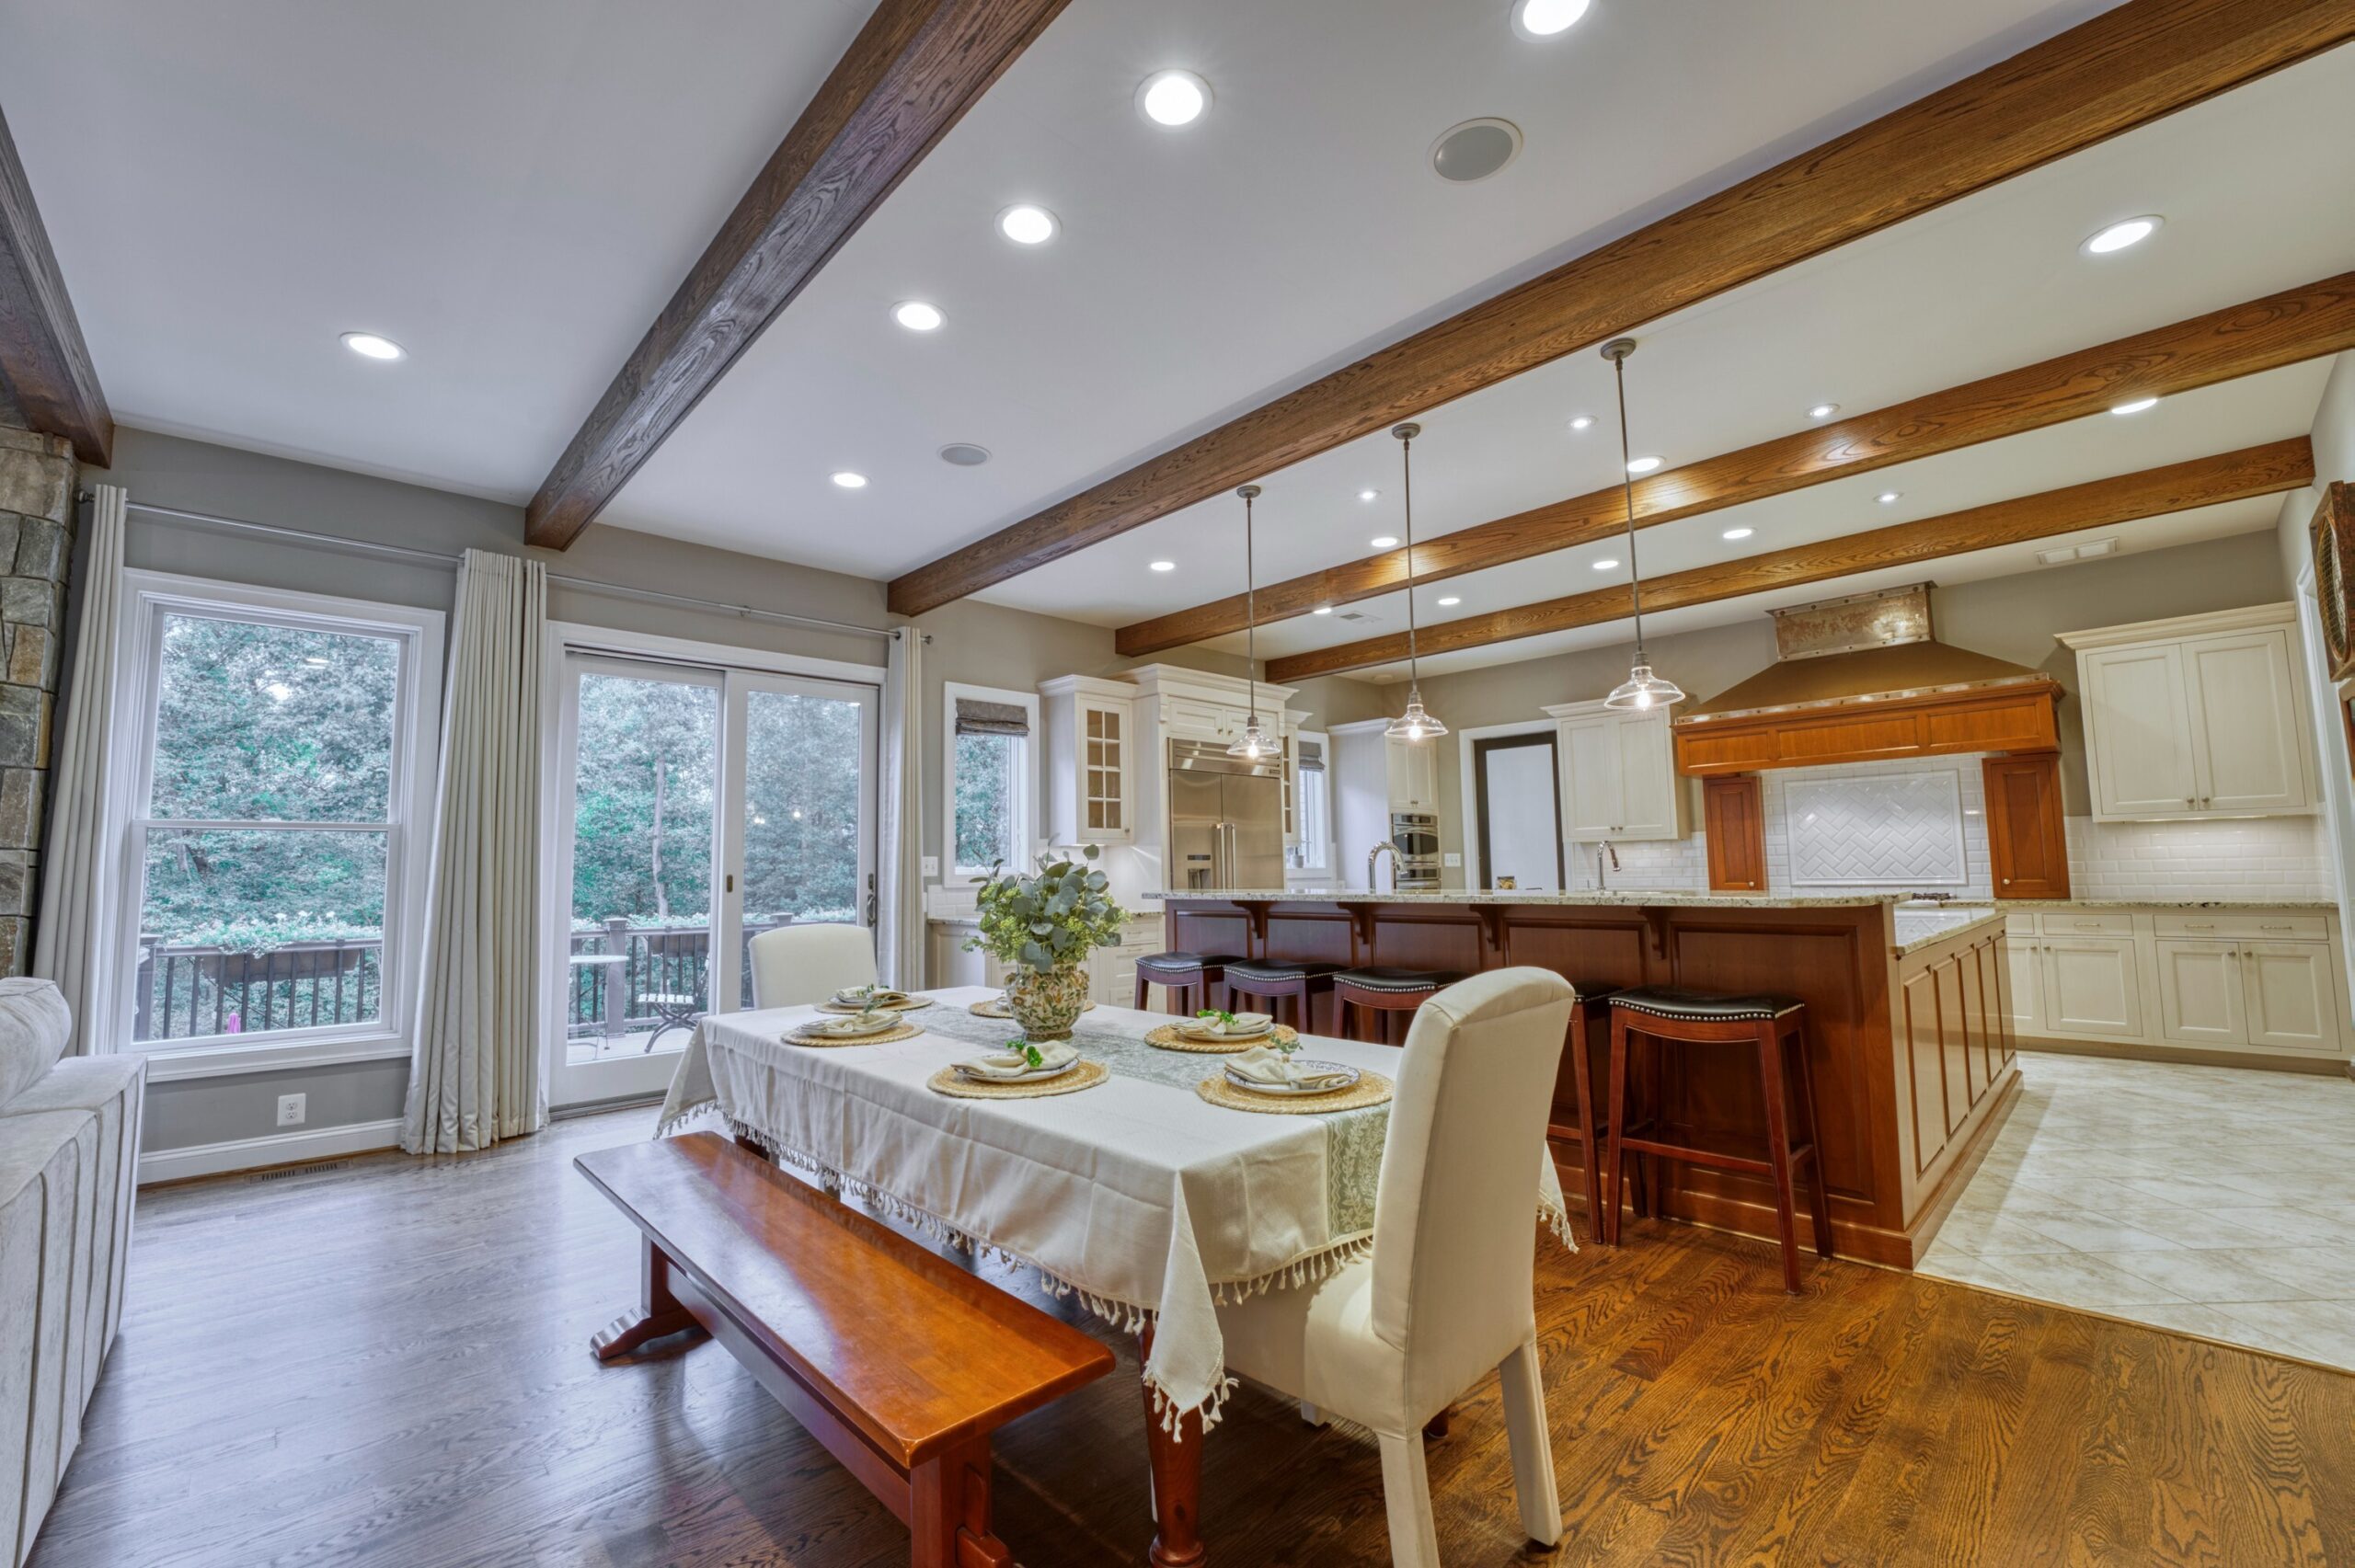 Professional interior photo of 40046 Mount Gilead Rd in Leesburg, Virginia - showing the kitchen table next to the large kitchen bar with 5 barstools and exposed beams in the otherwise white ceiling